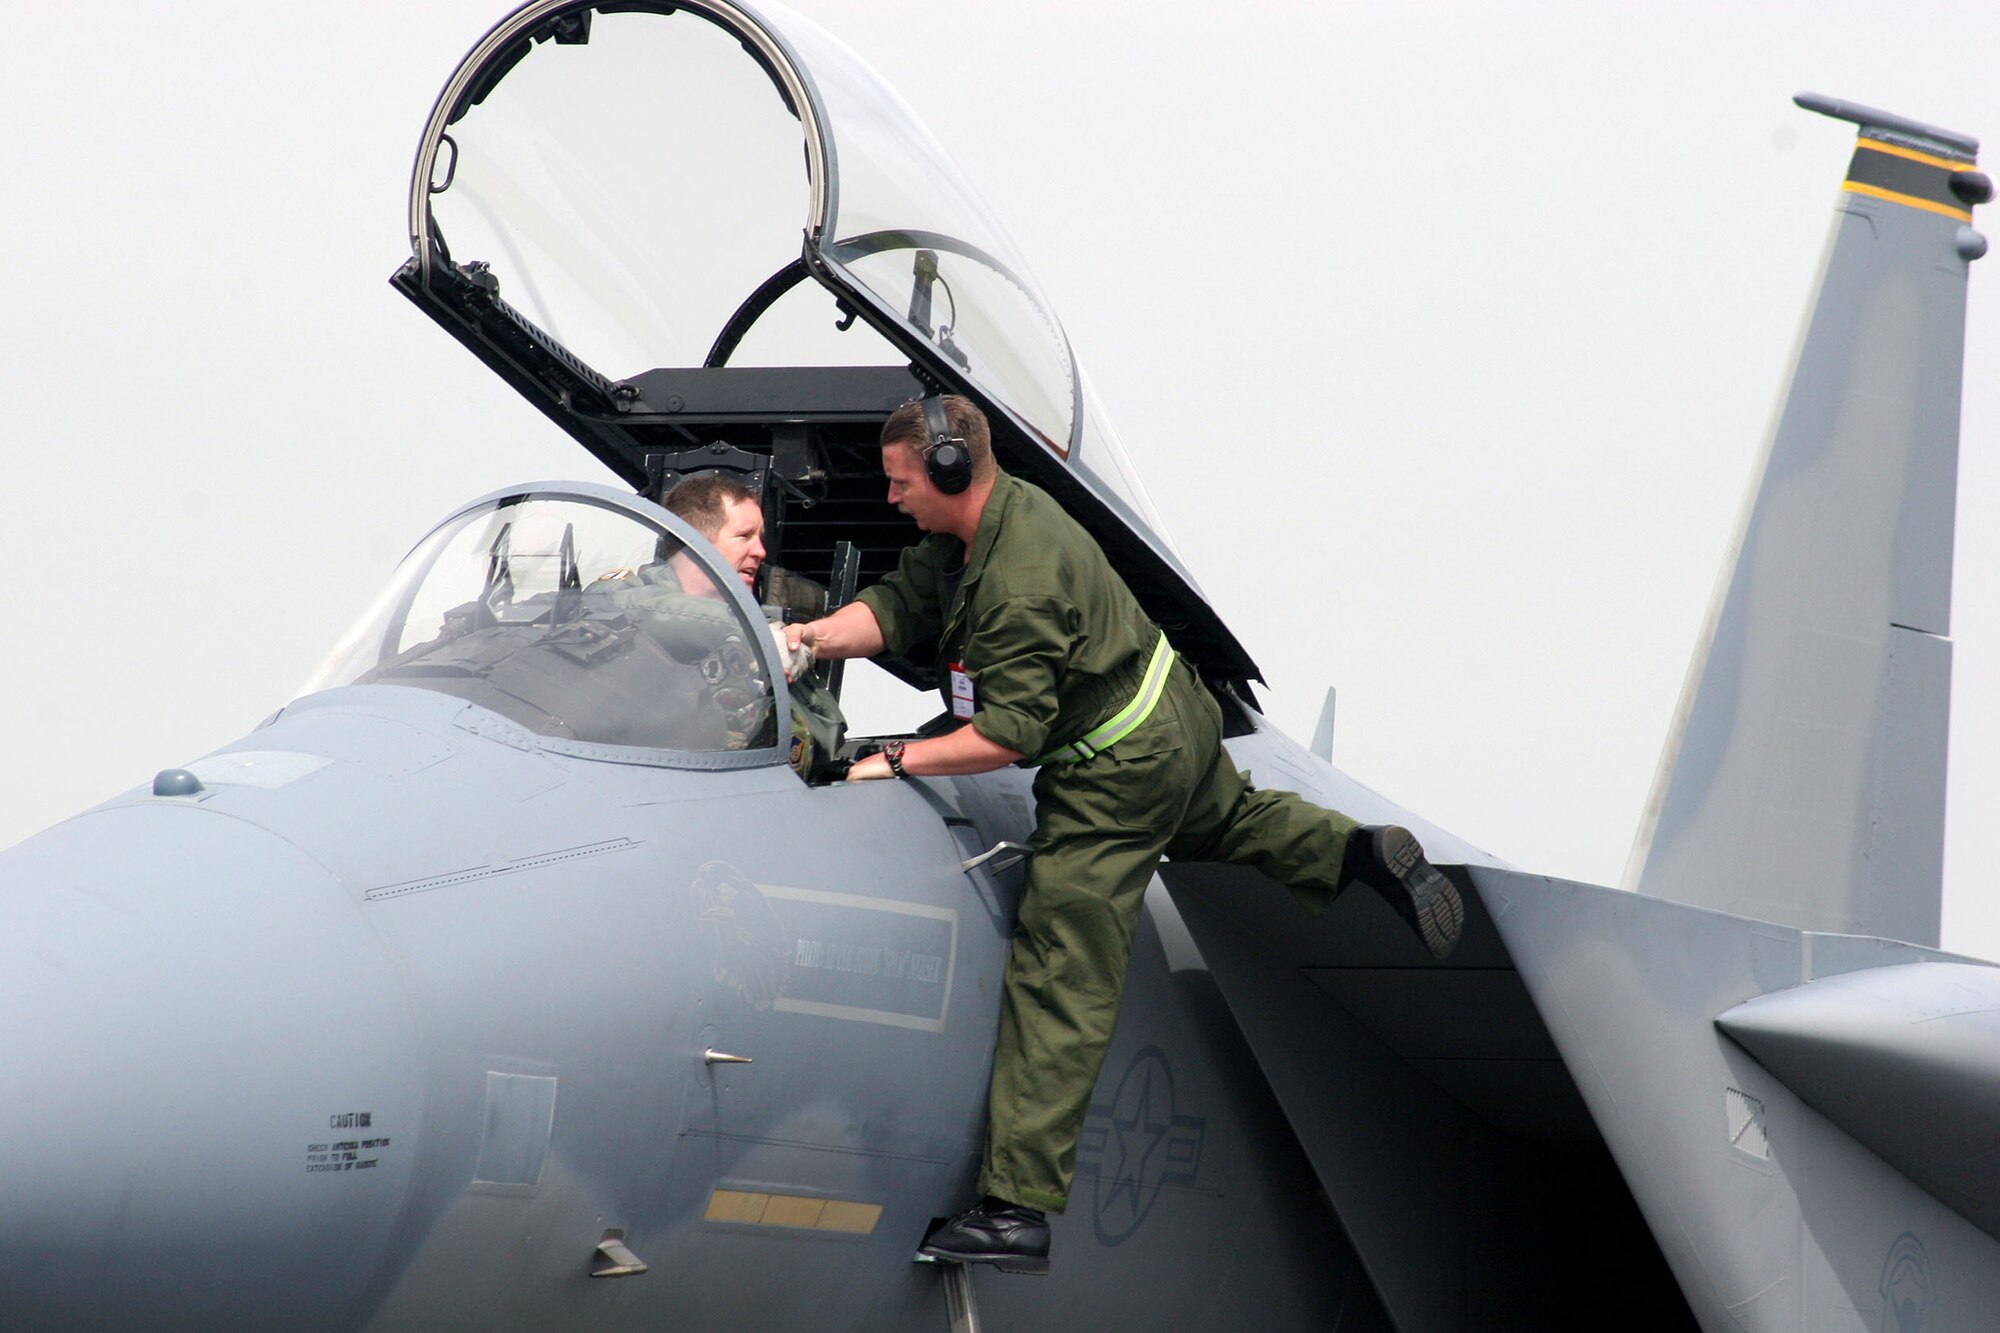 Air Force Lt. Col. Steve Neuser is greeted by a German crew chief shortly after he arrived in his F-15 Eagle at the Berlin Air Show on May 15, 2006. Various models of U.S. military aircraft and about 60 support personnel from bases in Europe and the United States are attending the air show at Berlin-Schoenefeld Airport May 16-21. Colonel Neuser is a pilot with the 493rd Fighter Squadron at Royal Air Force Lakenheath, England. (U.S. Air Force photo/Maj. Pamela A.Q. Cook)
